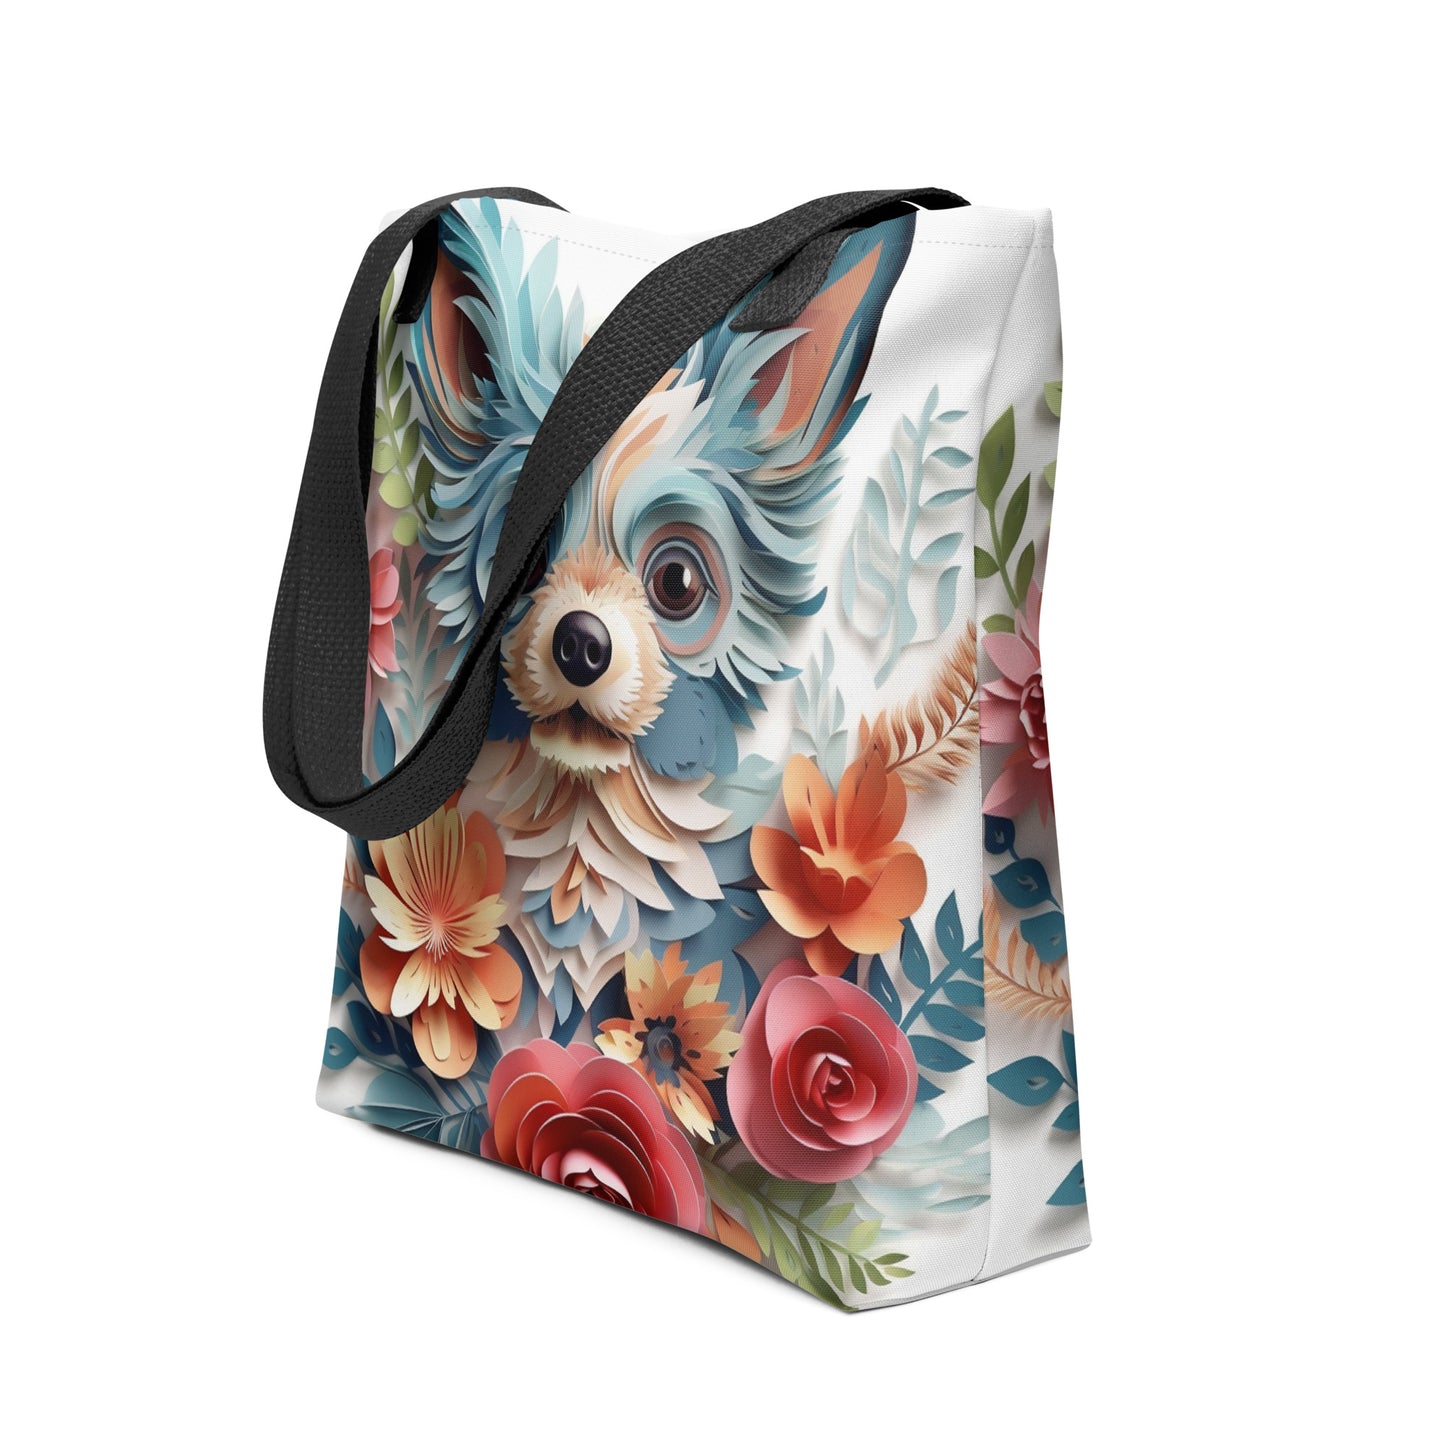 Chihuahua Dog Floral Tote bag for Dog Mom